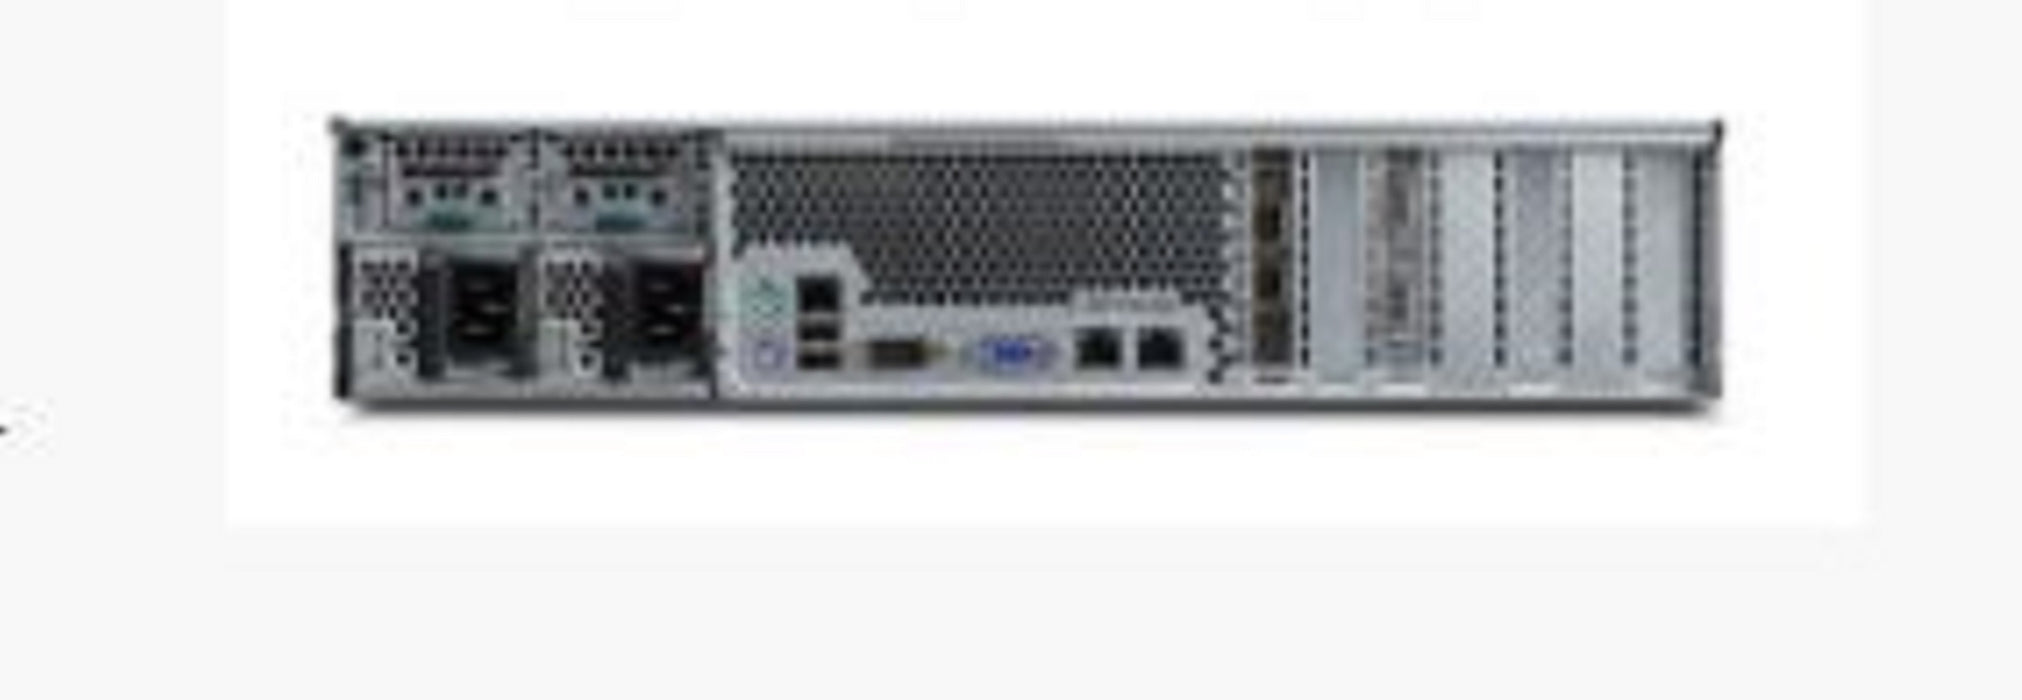 Isilon X200 72TB 3-Node Cluster with 2 x 8-Port Infiniband switches